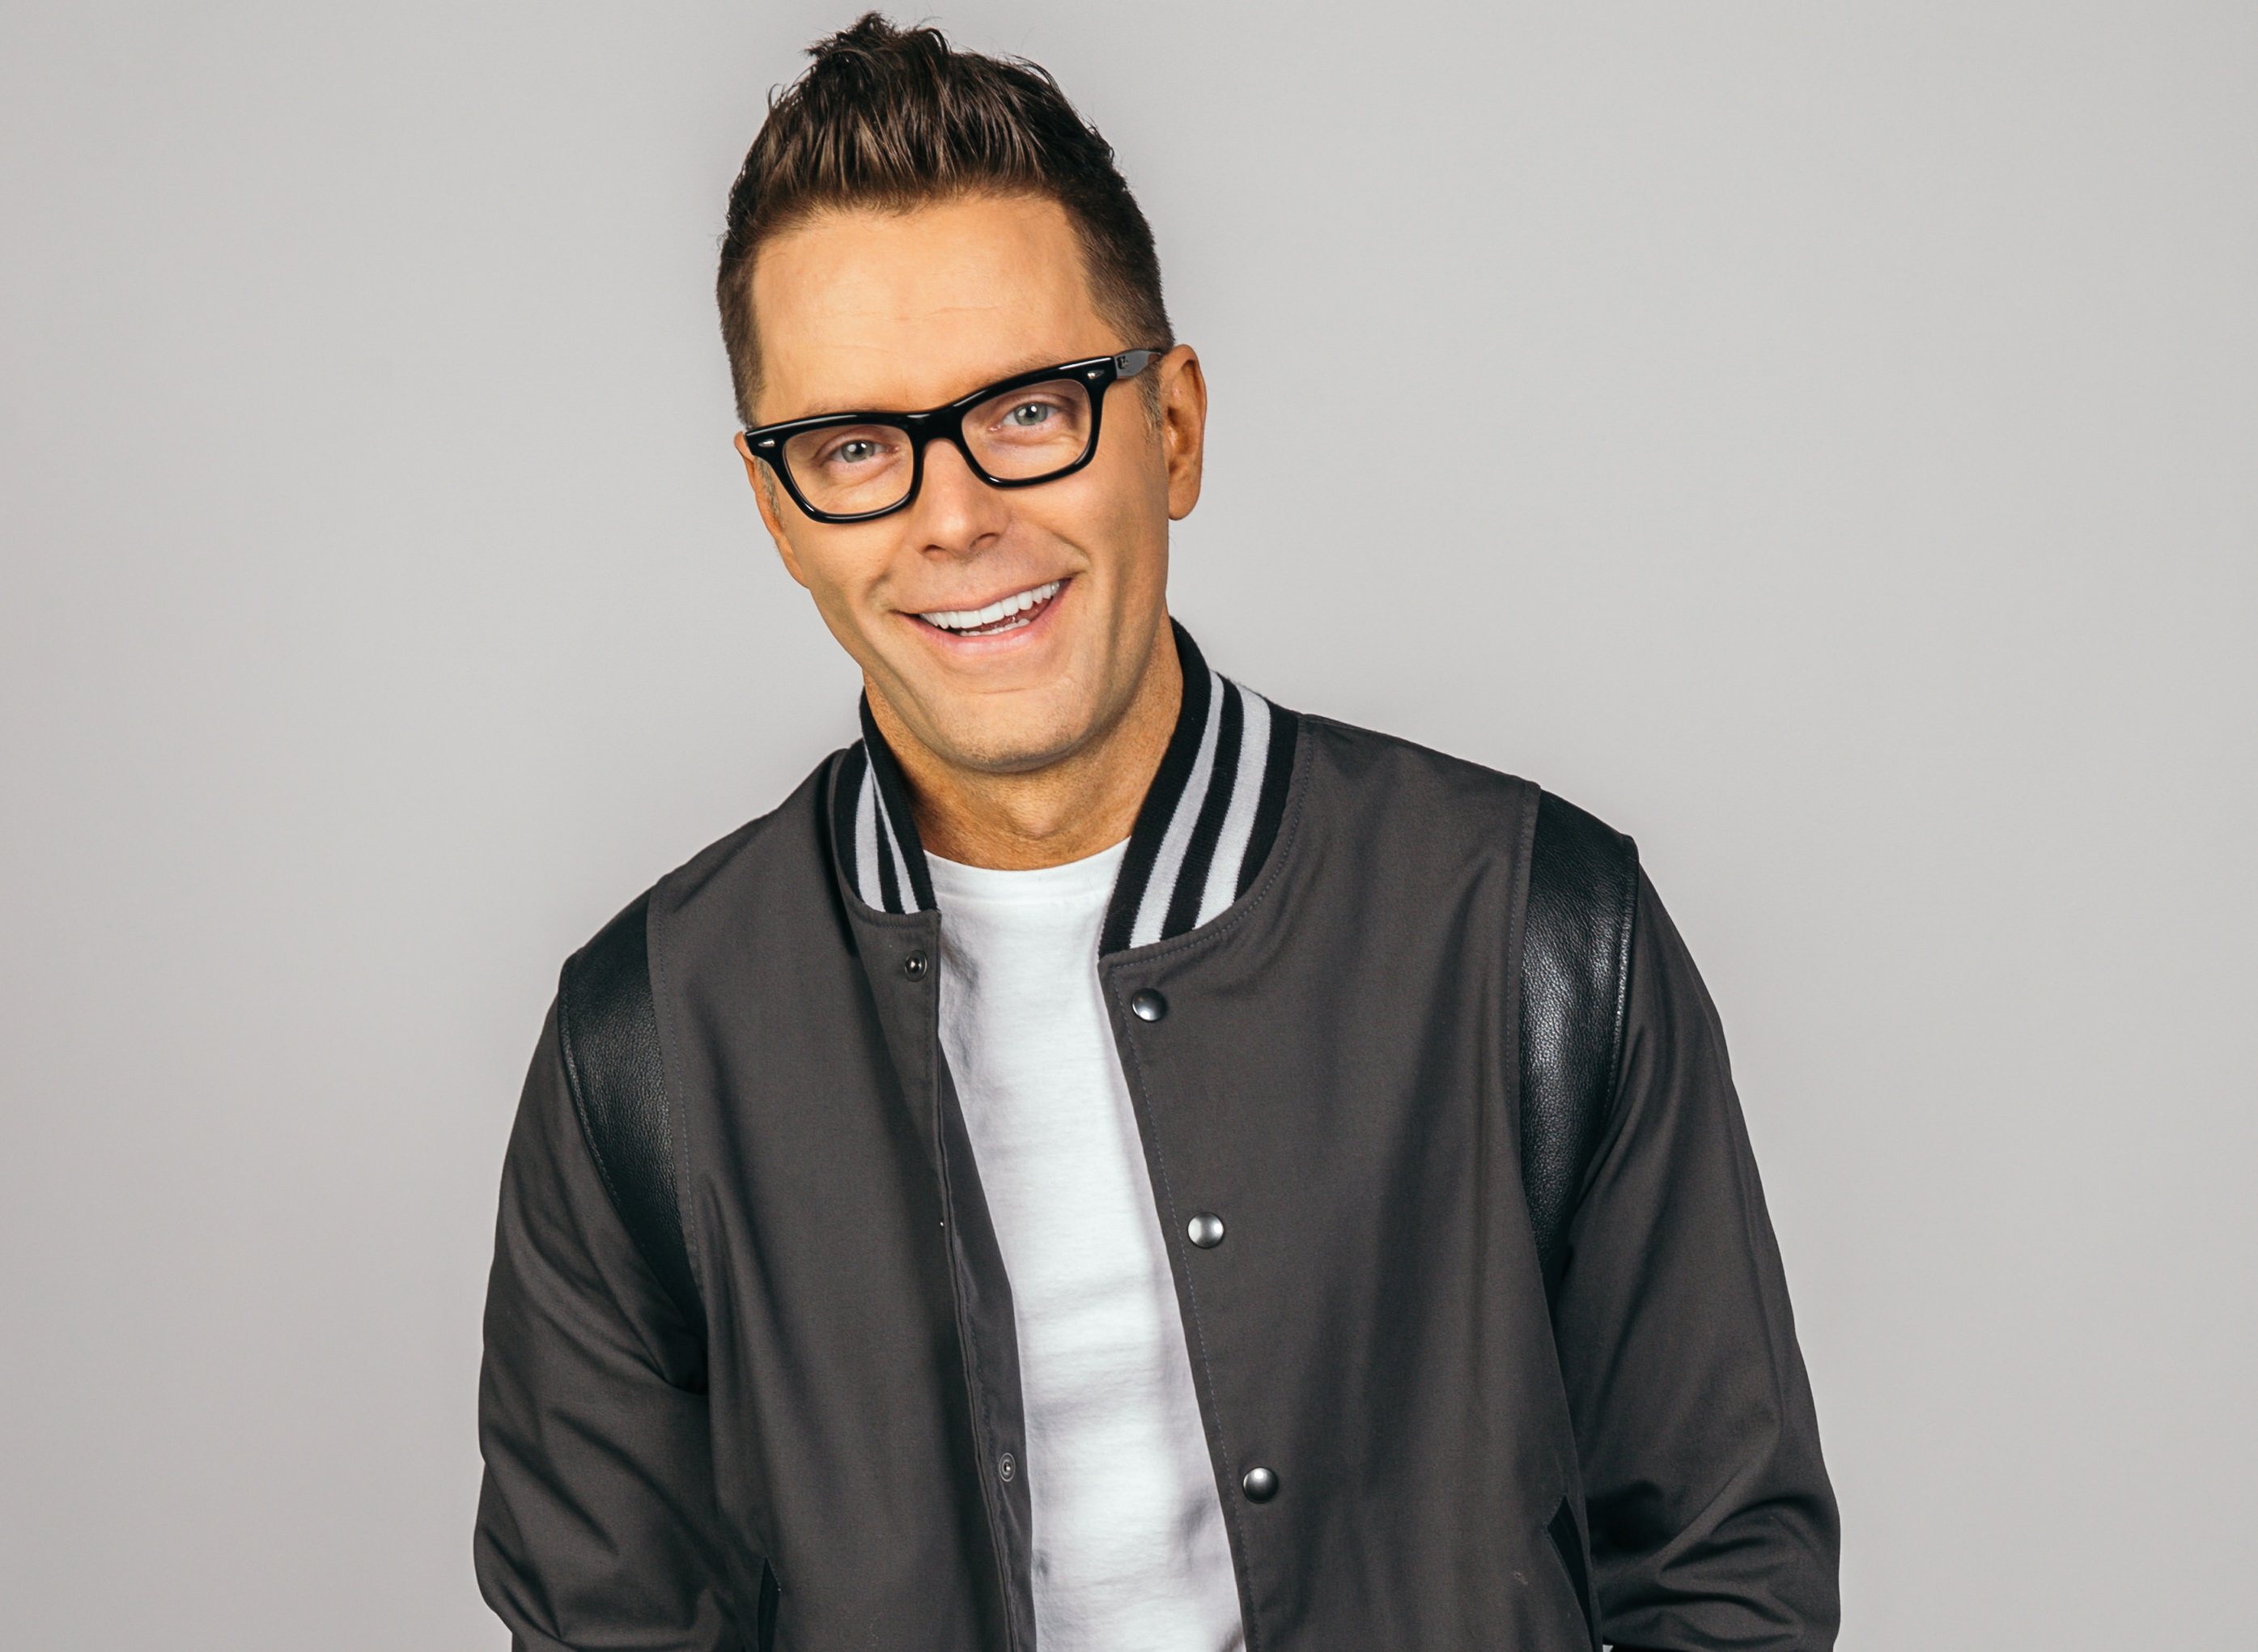 Tv And Radio Host Bobby Bones Announces Full Comedically Inspirational On Tour Schedule 